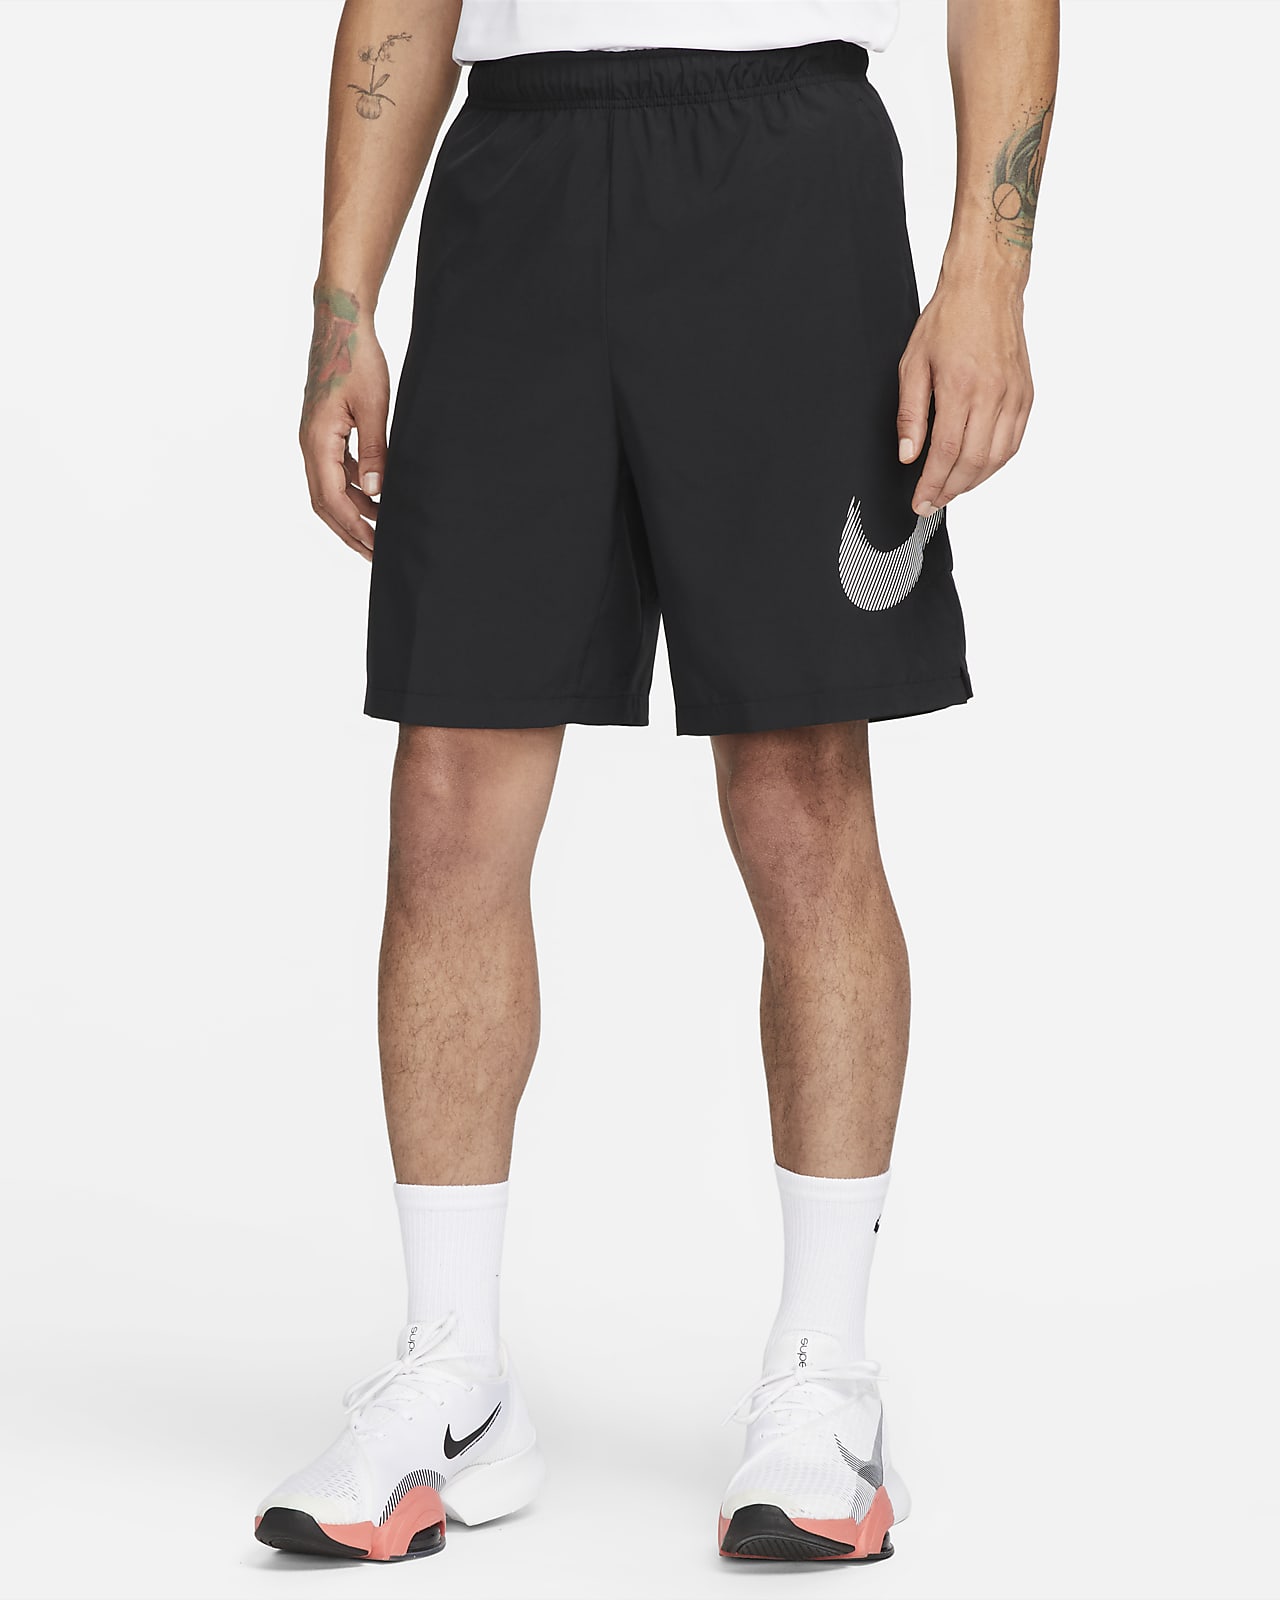 Nike Dri-FIT Men's 9" (23cm approx.) Woven Graphic Fitness Shorts